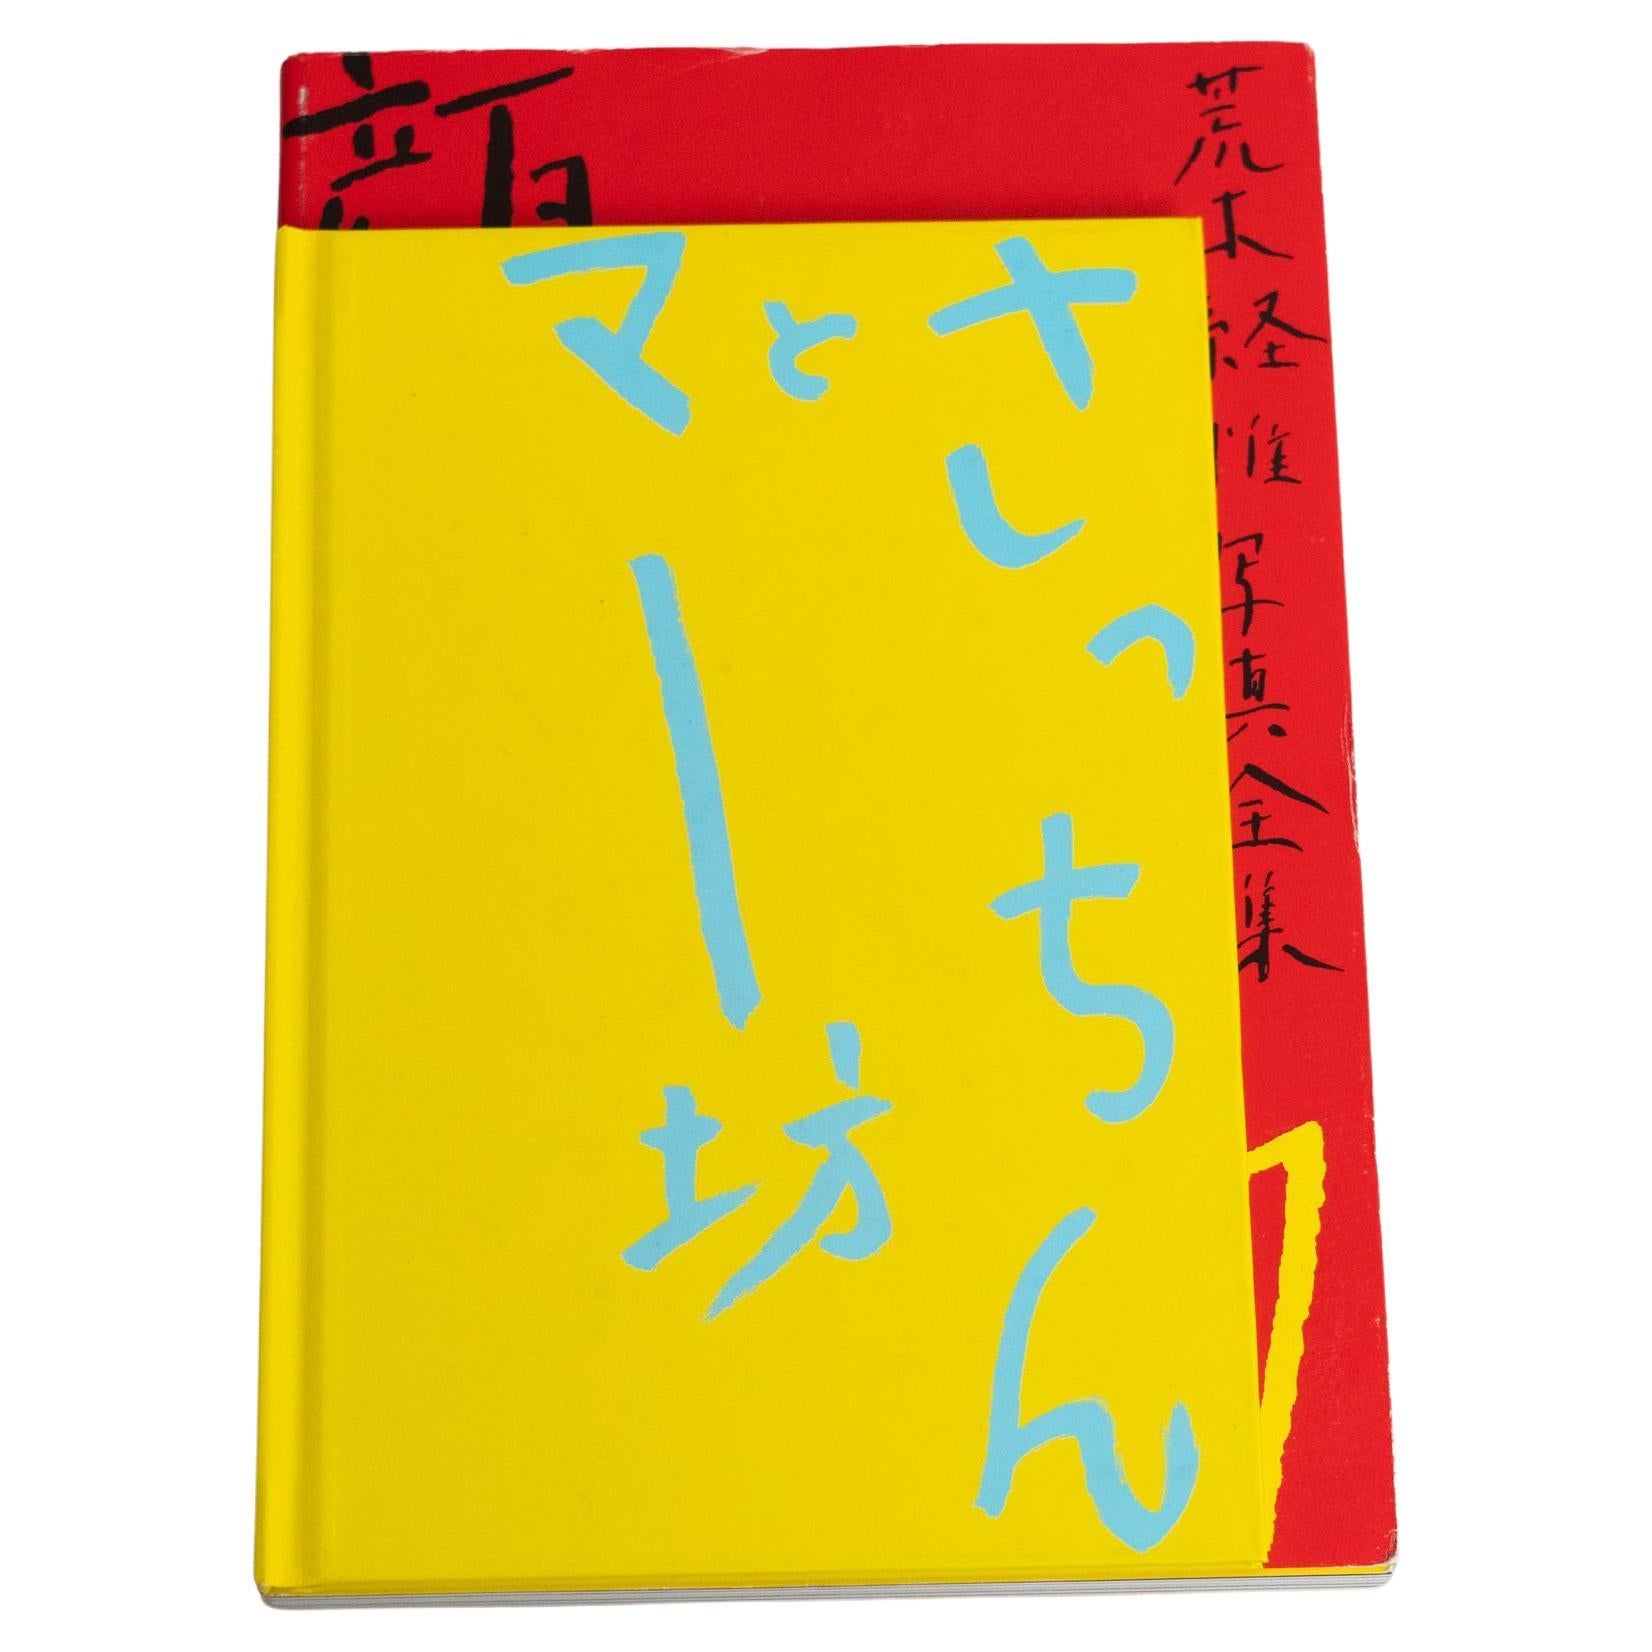 Araki's Artistry:1st Edition Books - Satchin and Mabo + Works Collection Nº1